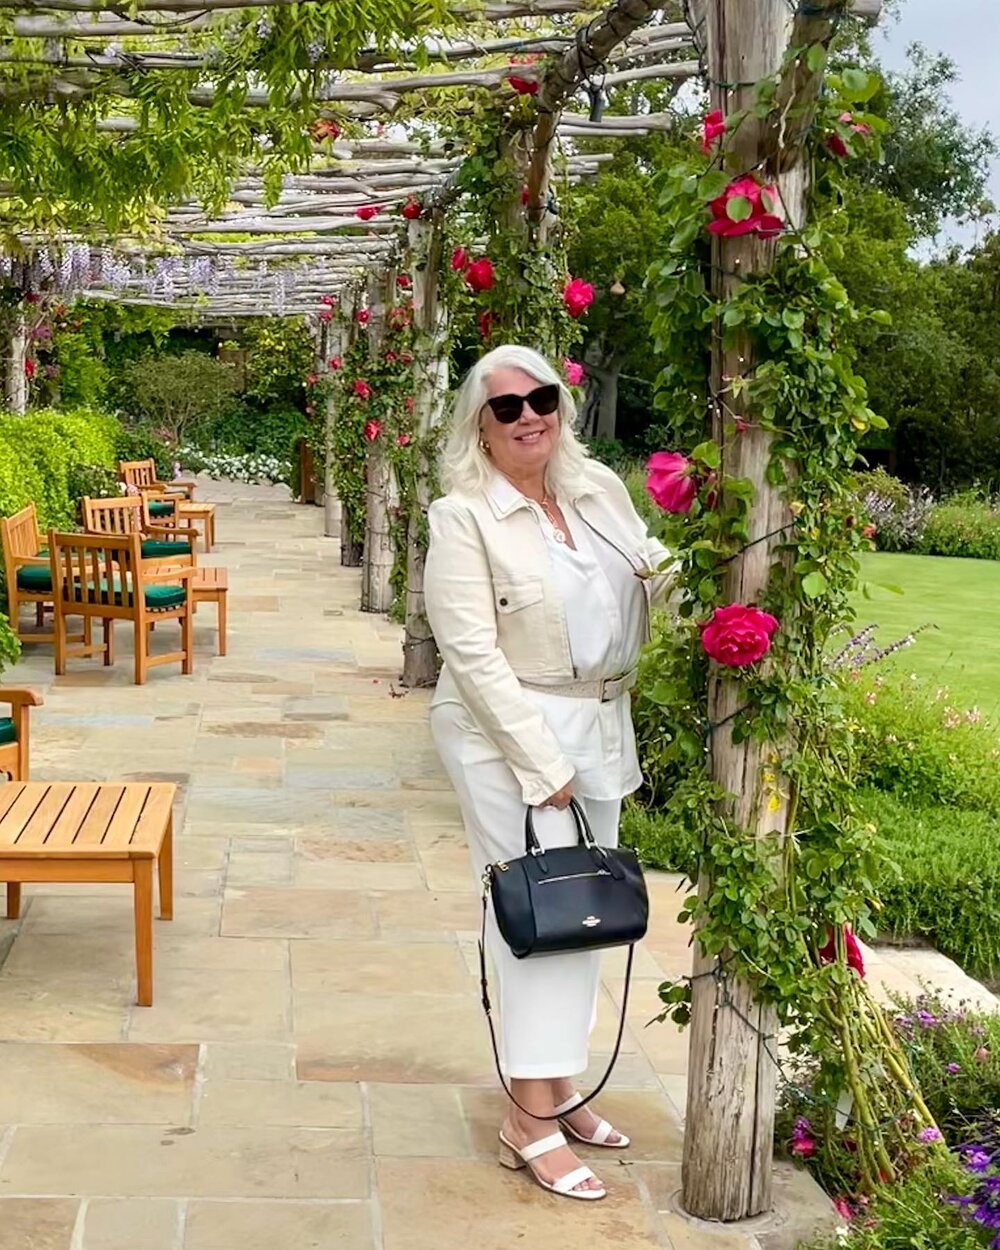 A long awaited visit to charming San Ysidro Ranch and the Stonehouse. 💐🍋🥂 🔸DM us to learn more and book with Virtuoso amenities. #sanysidroranch #cadencetravel #traveladvisor #luxurytravel #luxuryhotels